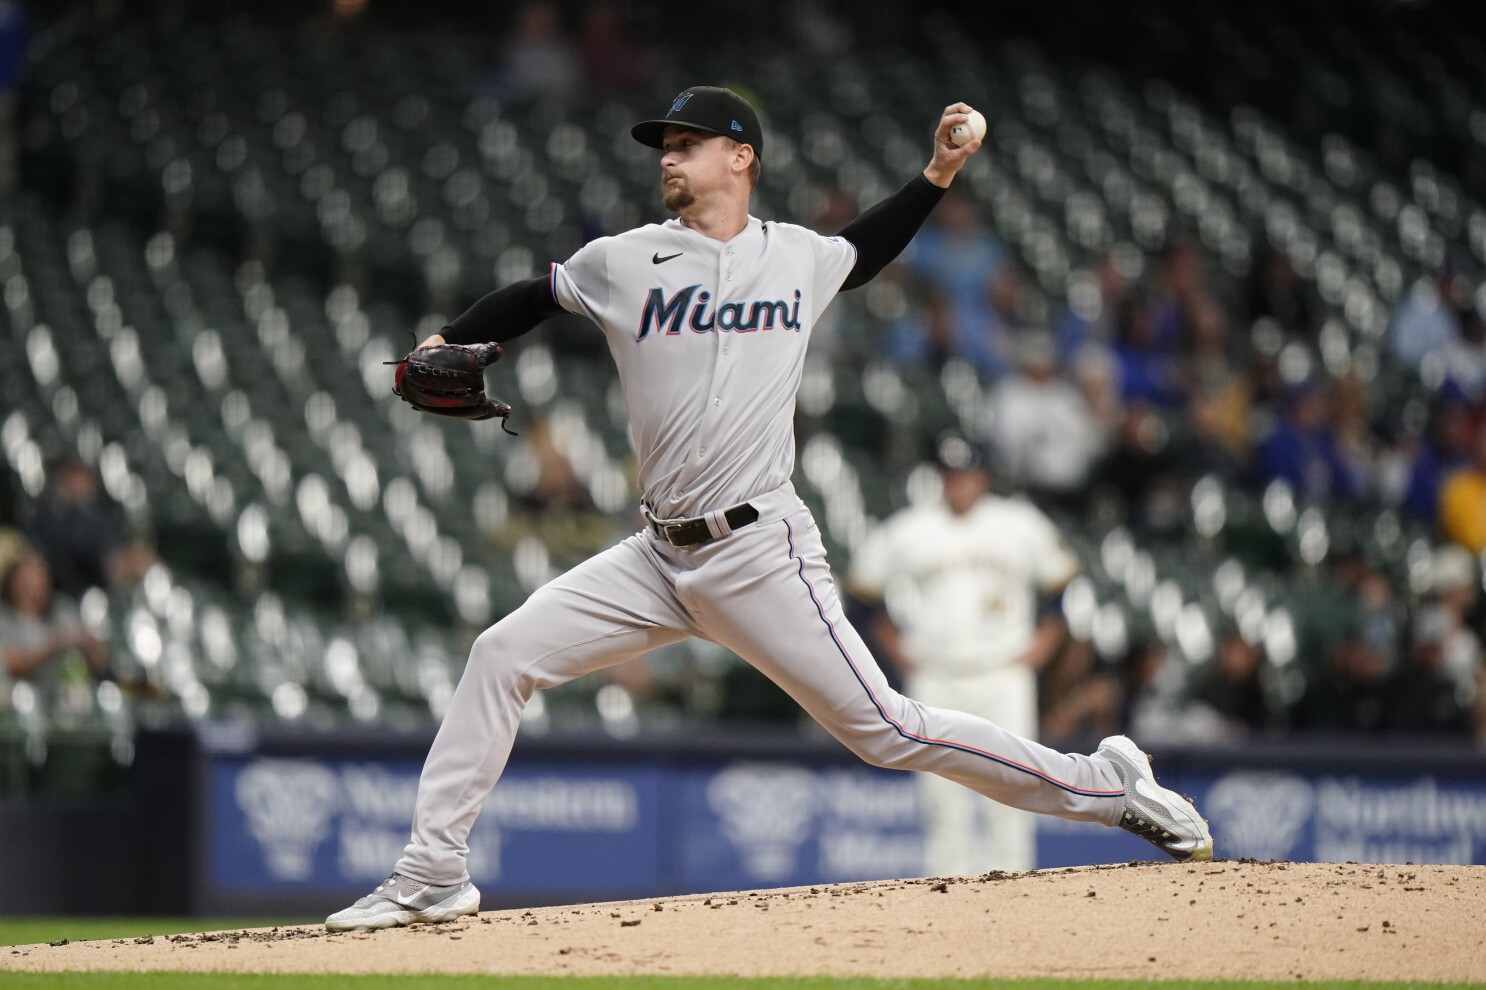 Tyrone Taylor, relievers power Brewers past Marlins